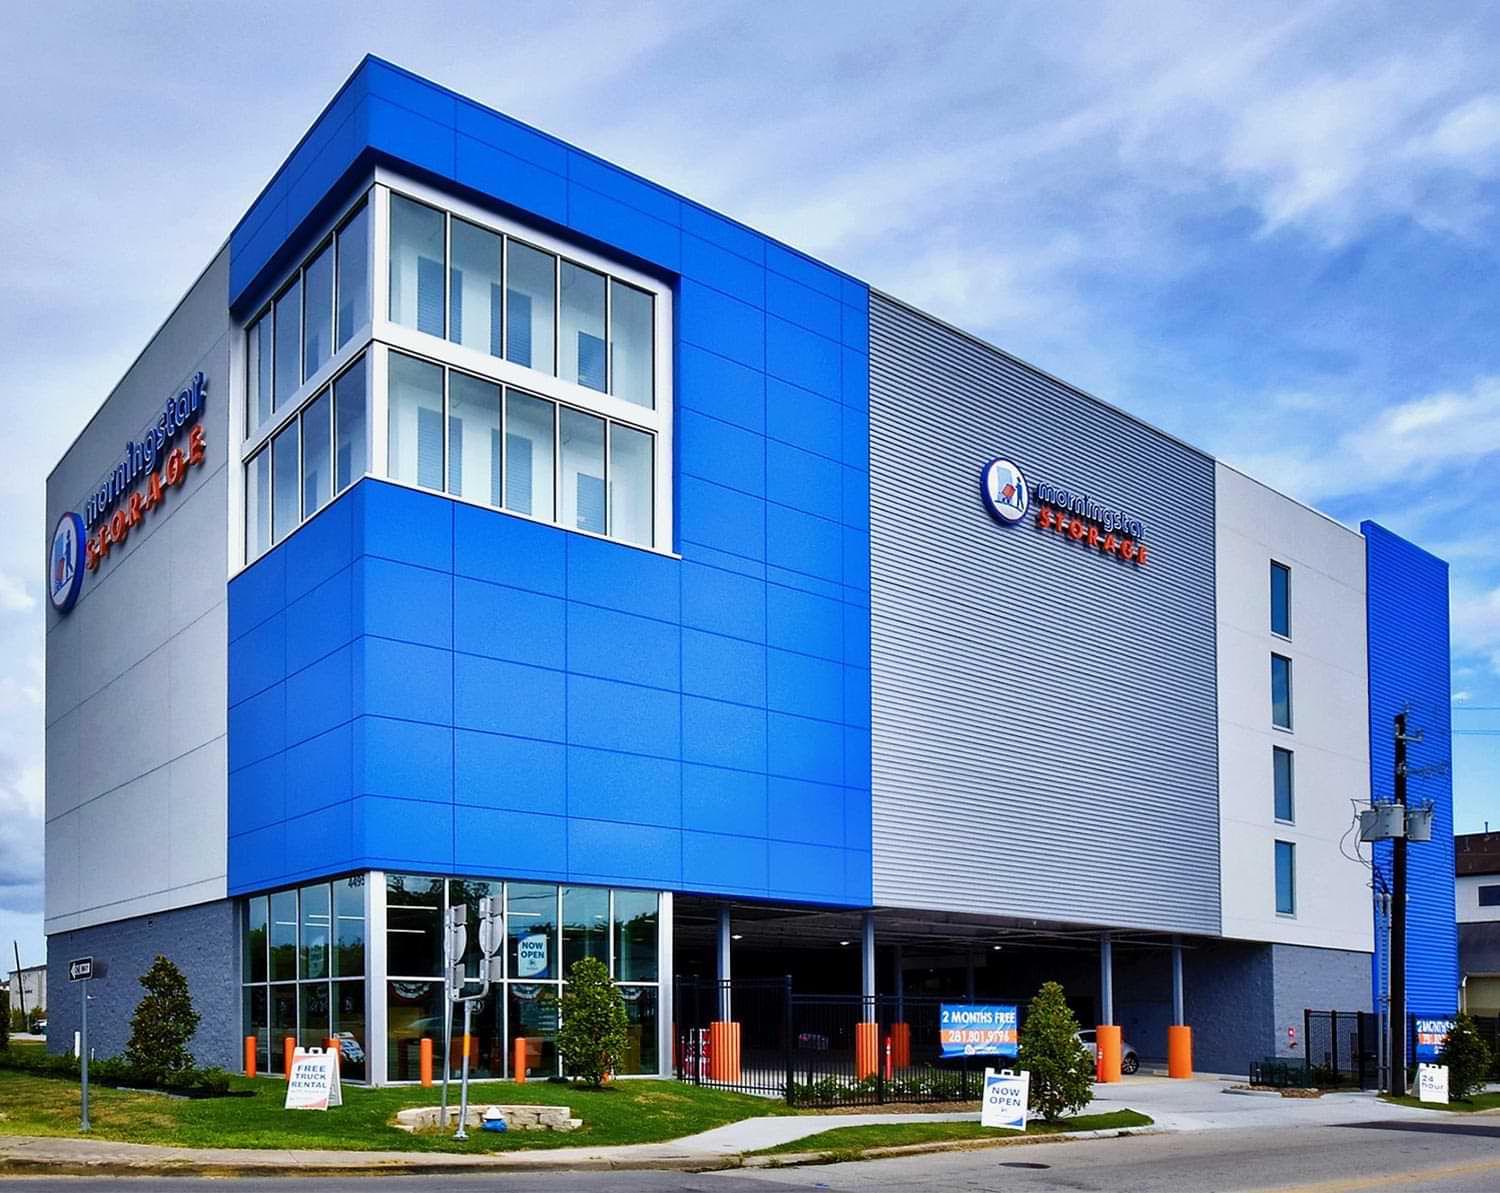 external view of the 5 story blue and orange schemed Morning Star Storage facility located in Houston